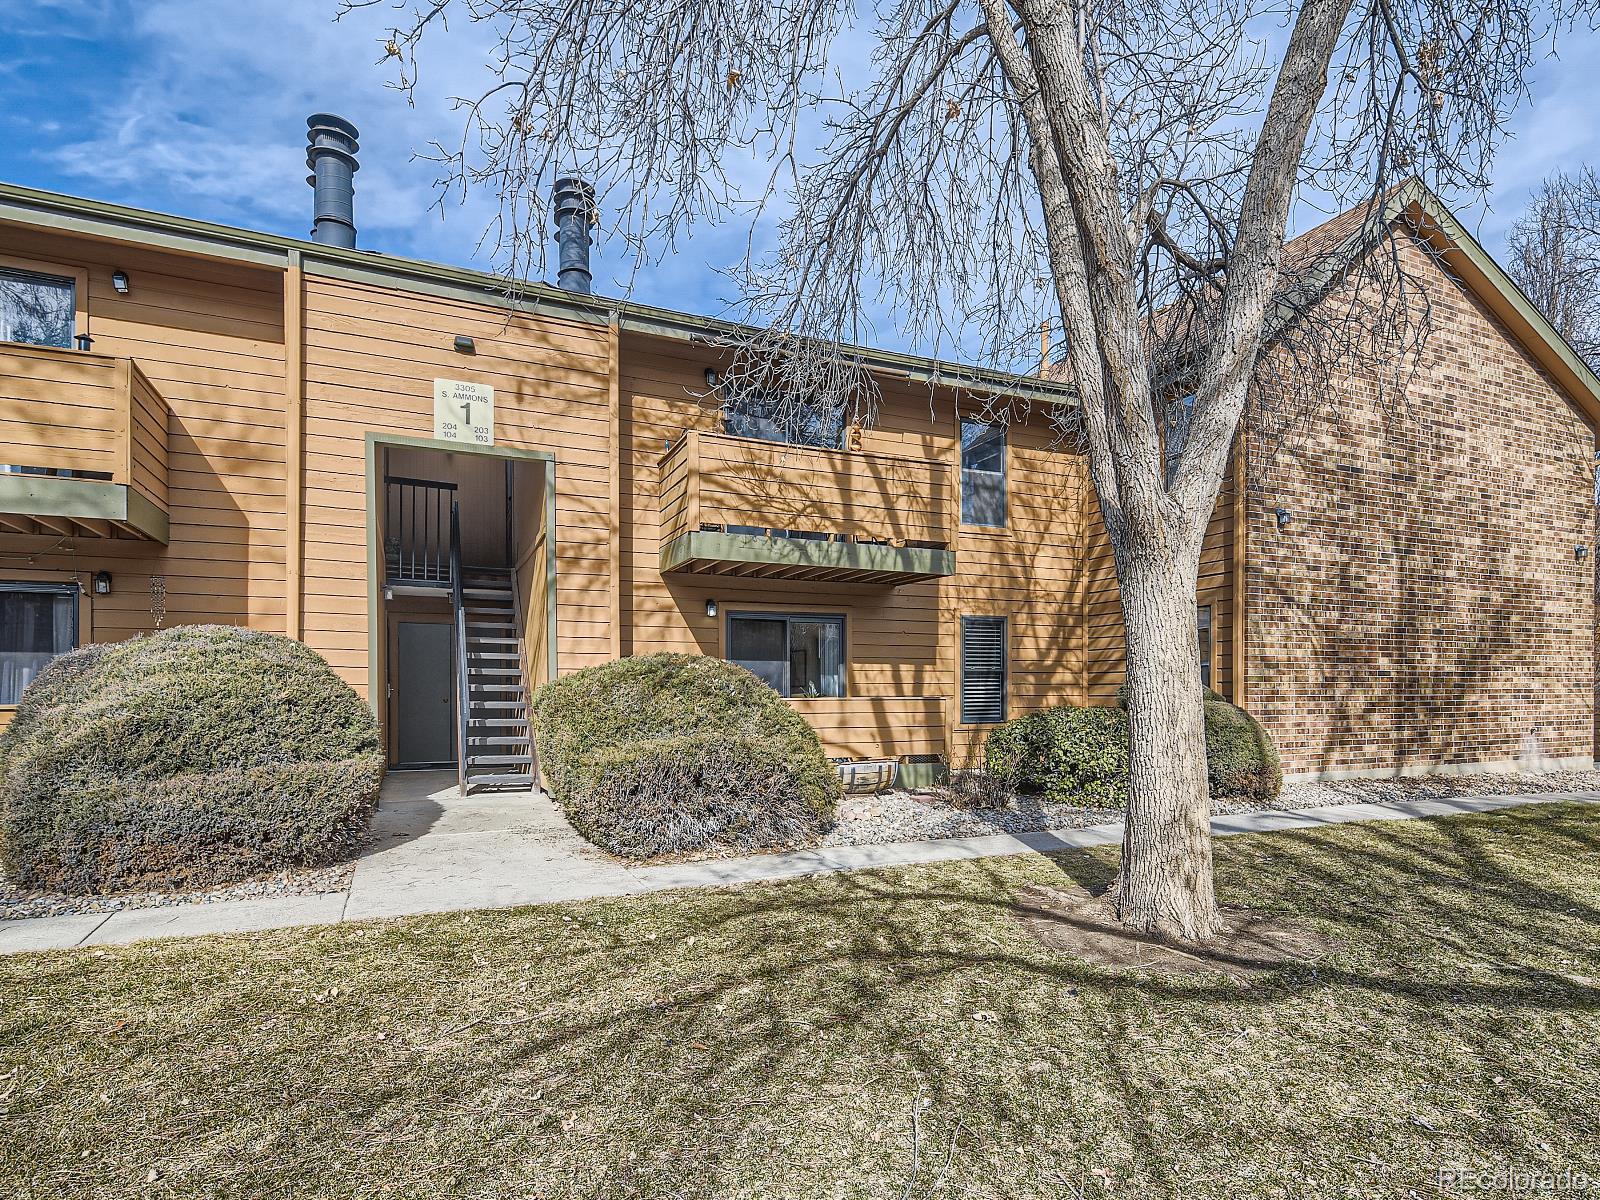 Report Image for 3305 S Ammons Street,Lakewood, Colorado